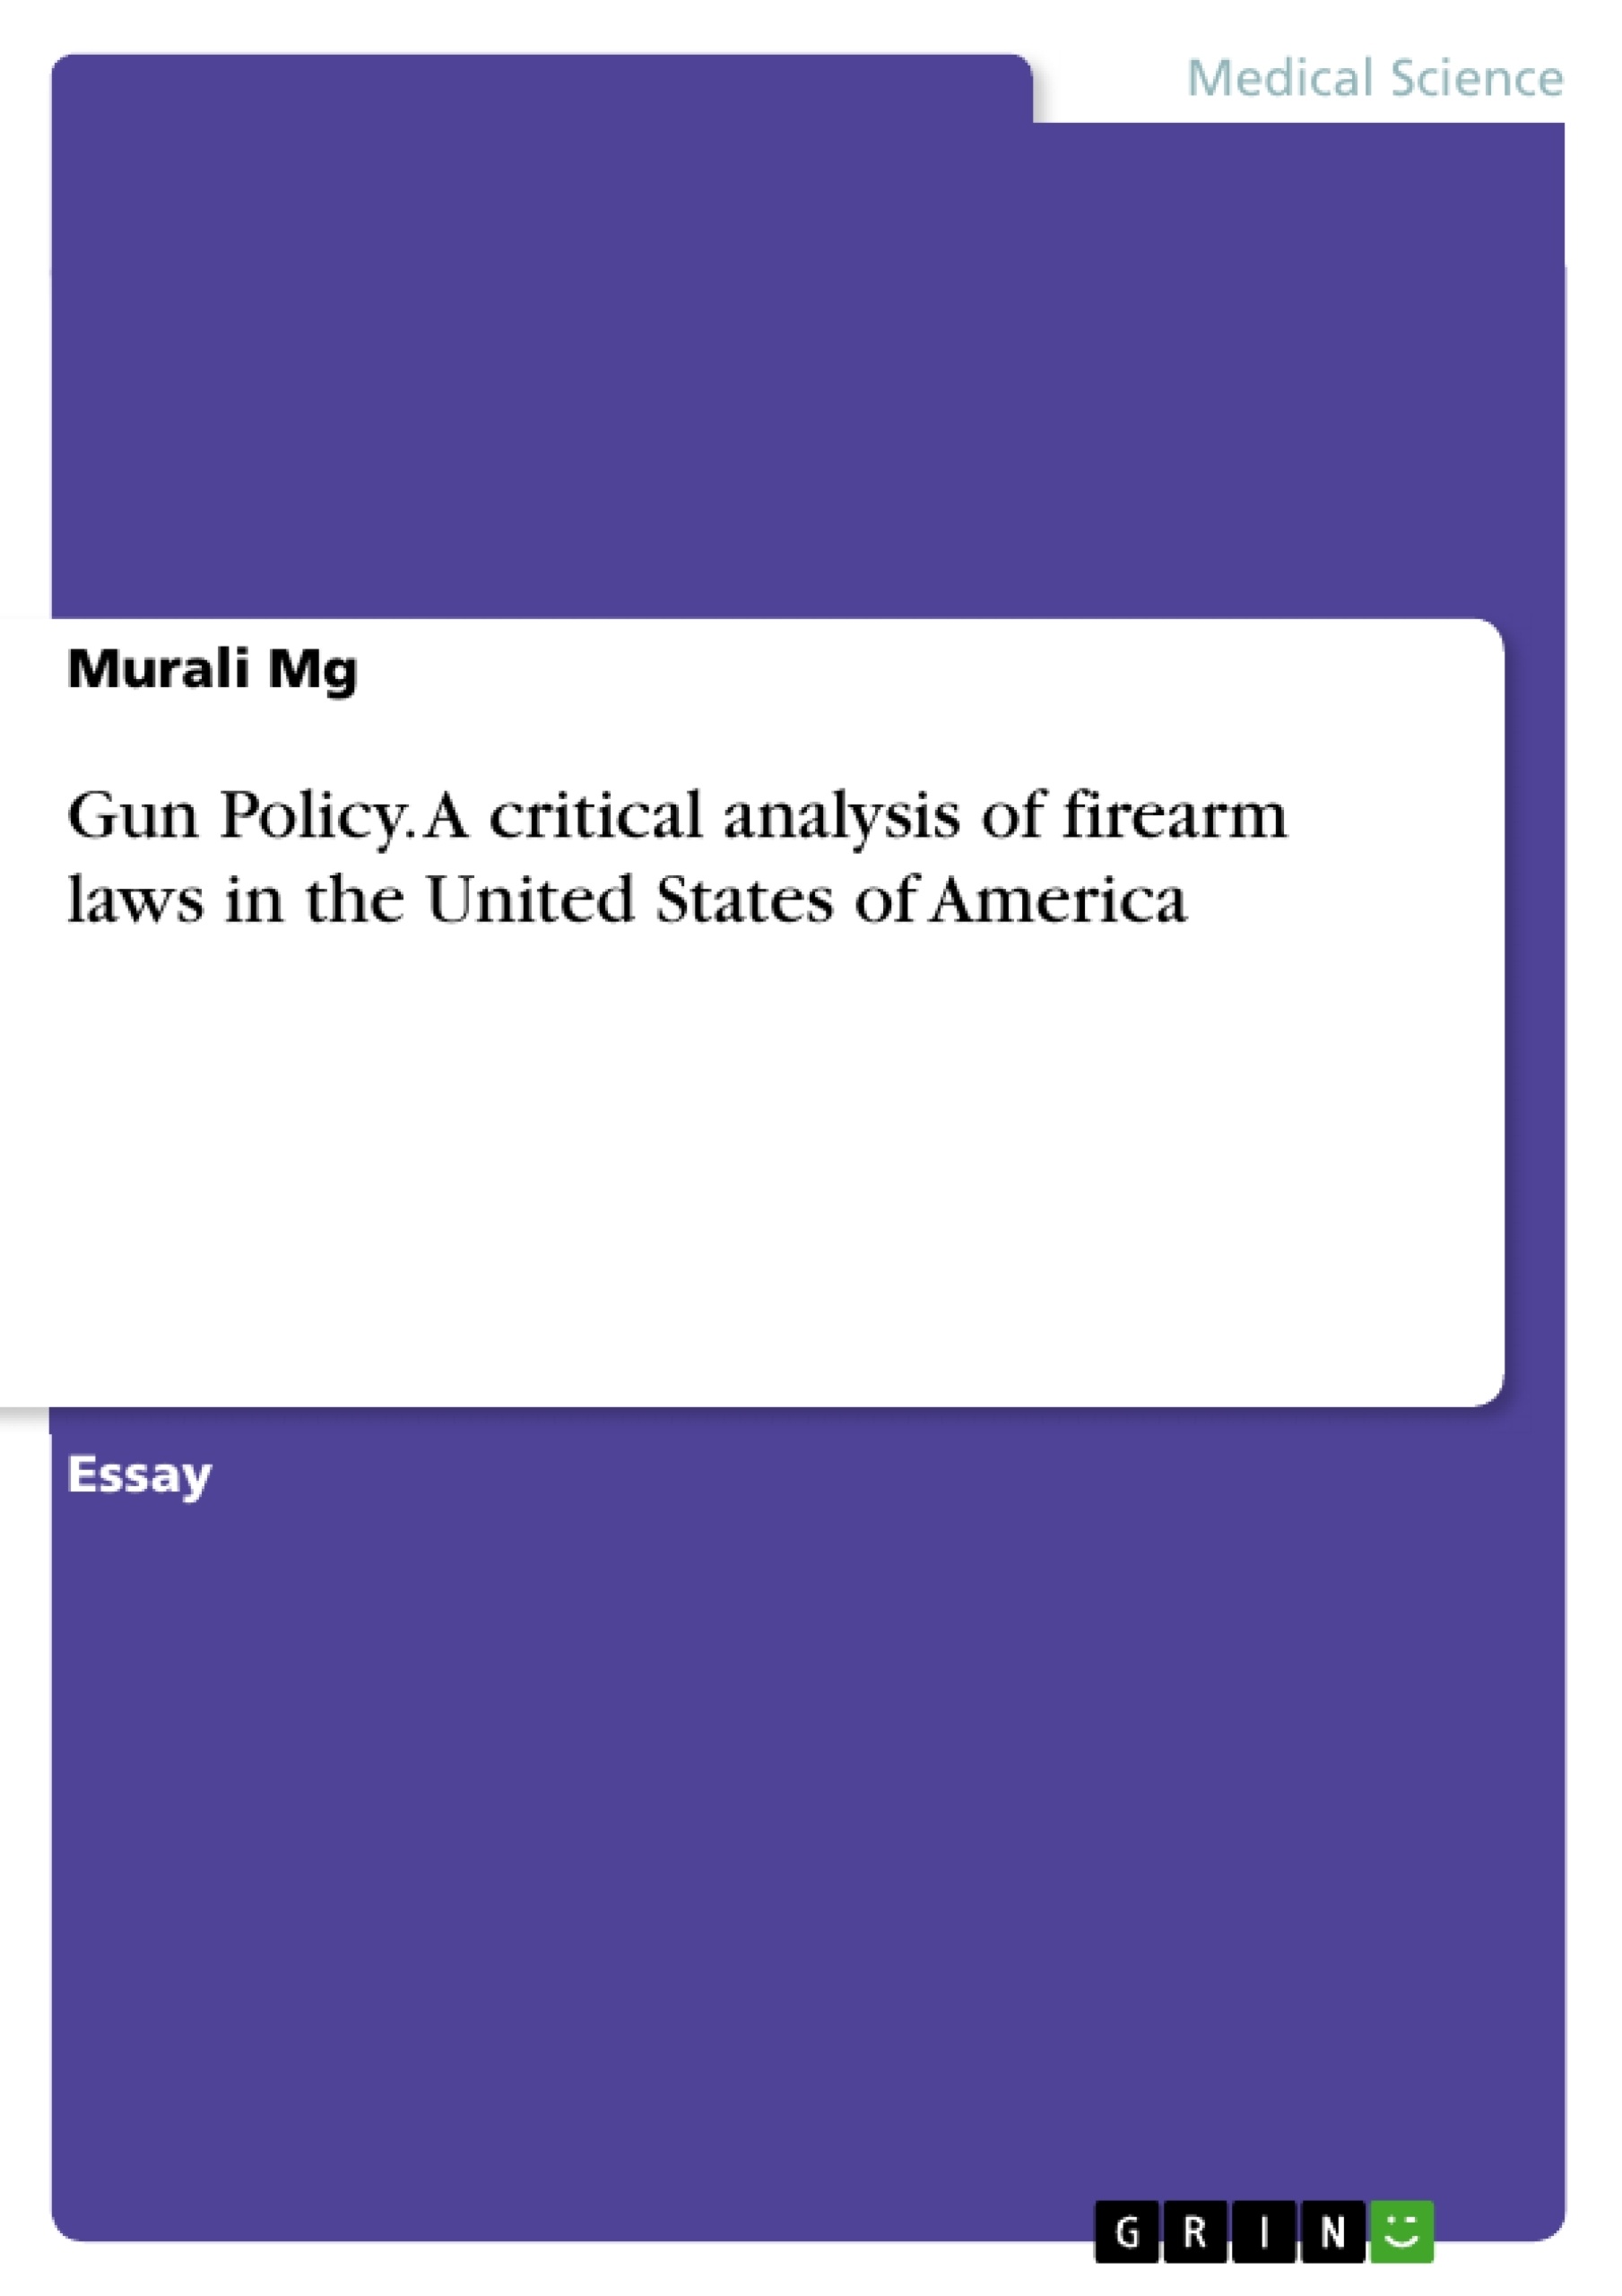 Title: Gun Policy. A critical analysis of firearm laws in the United States of America